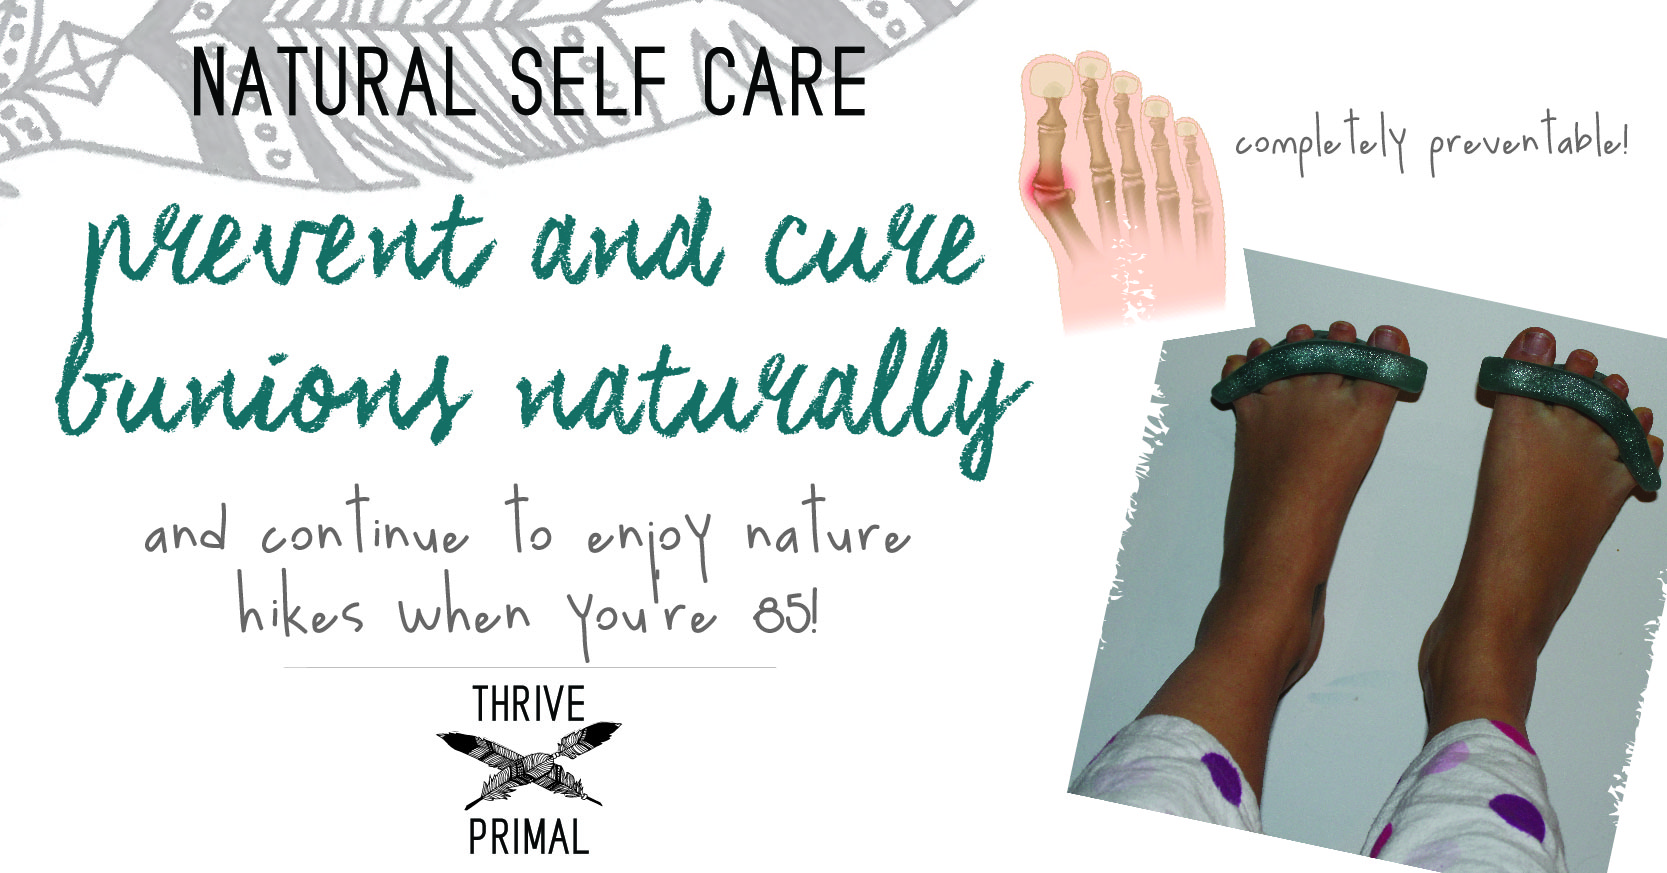 Thrive Primal - prevent and cure bunions naturally